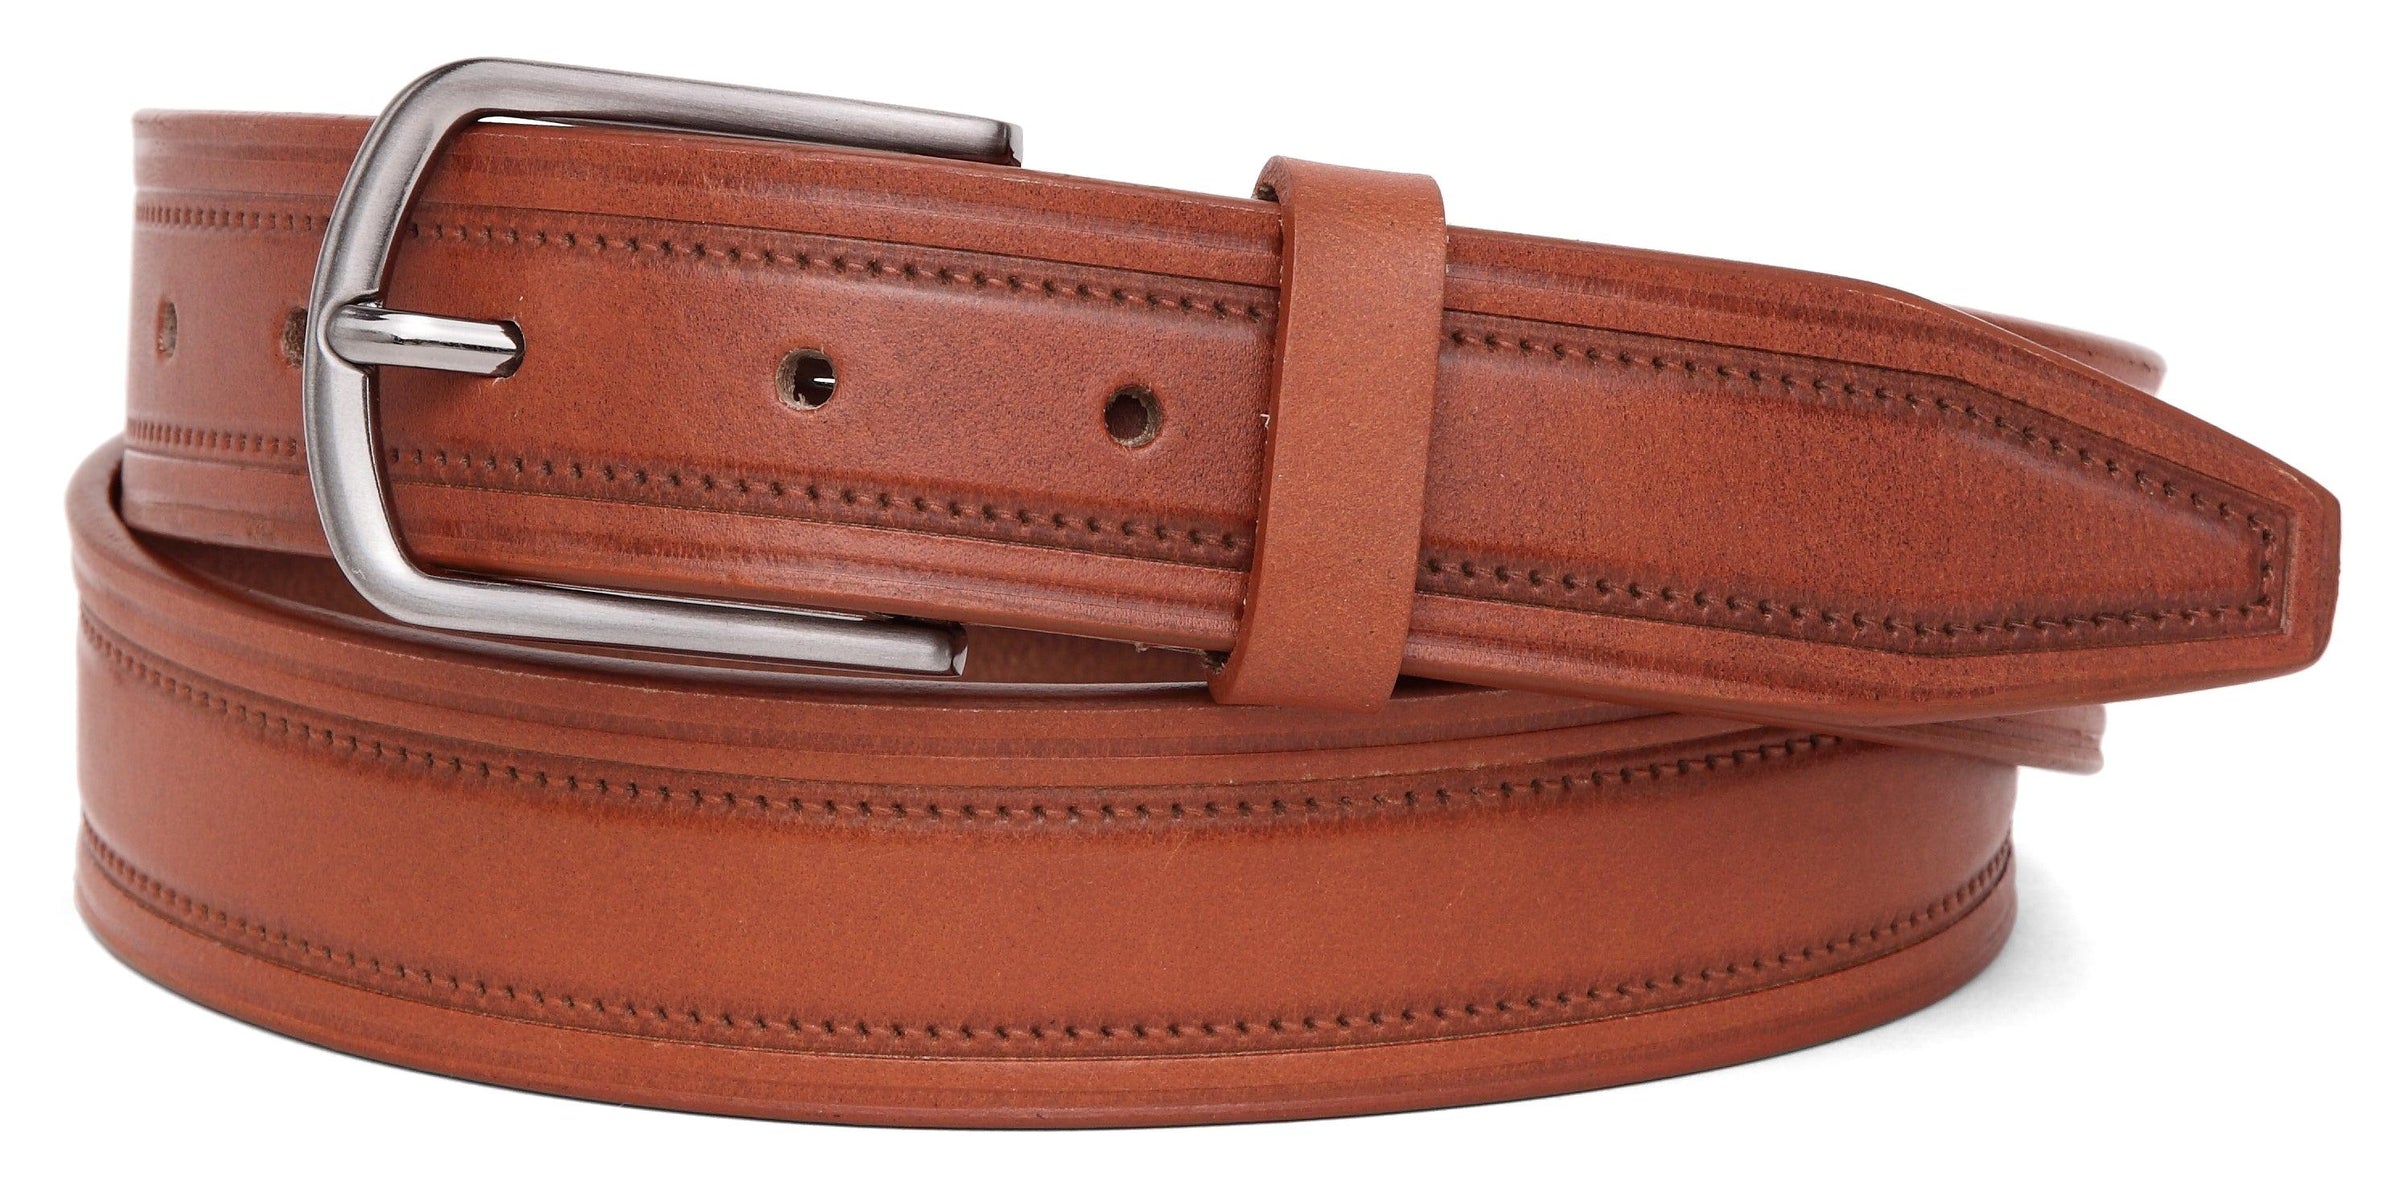 casual leather belt